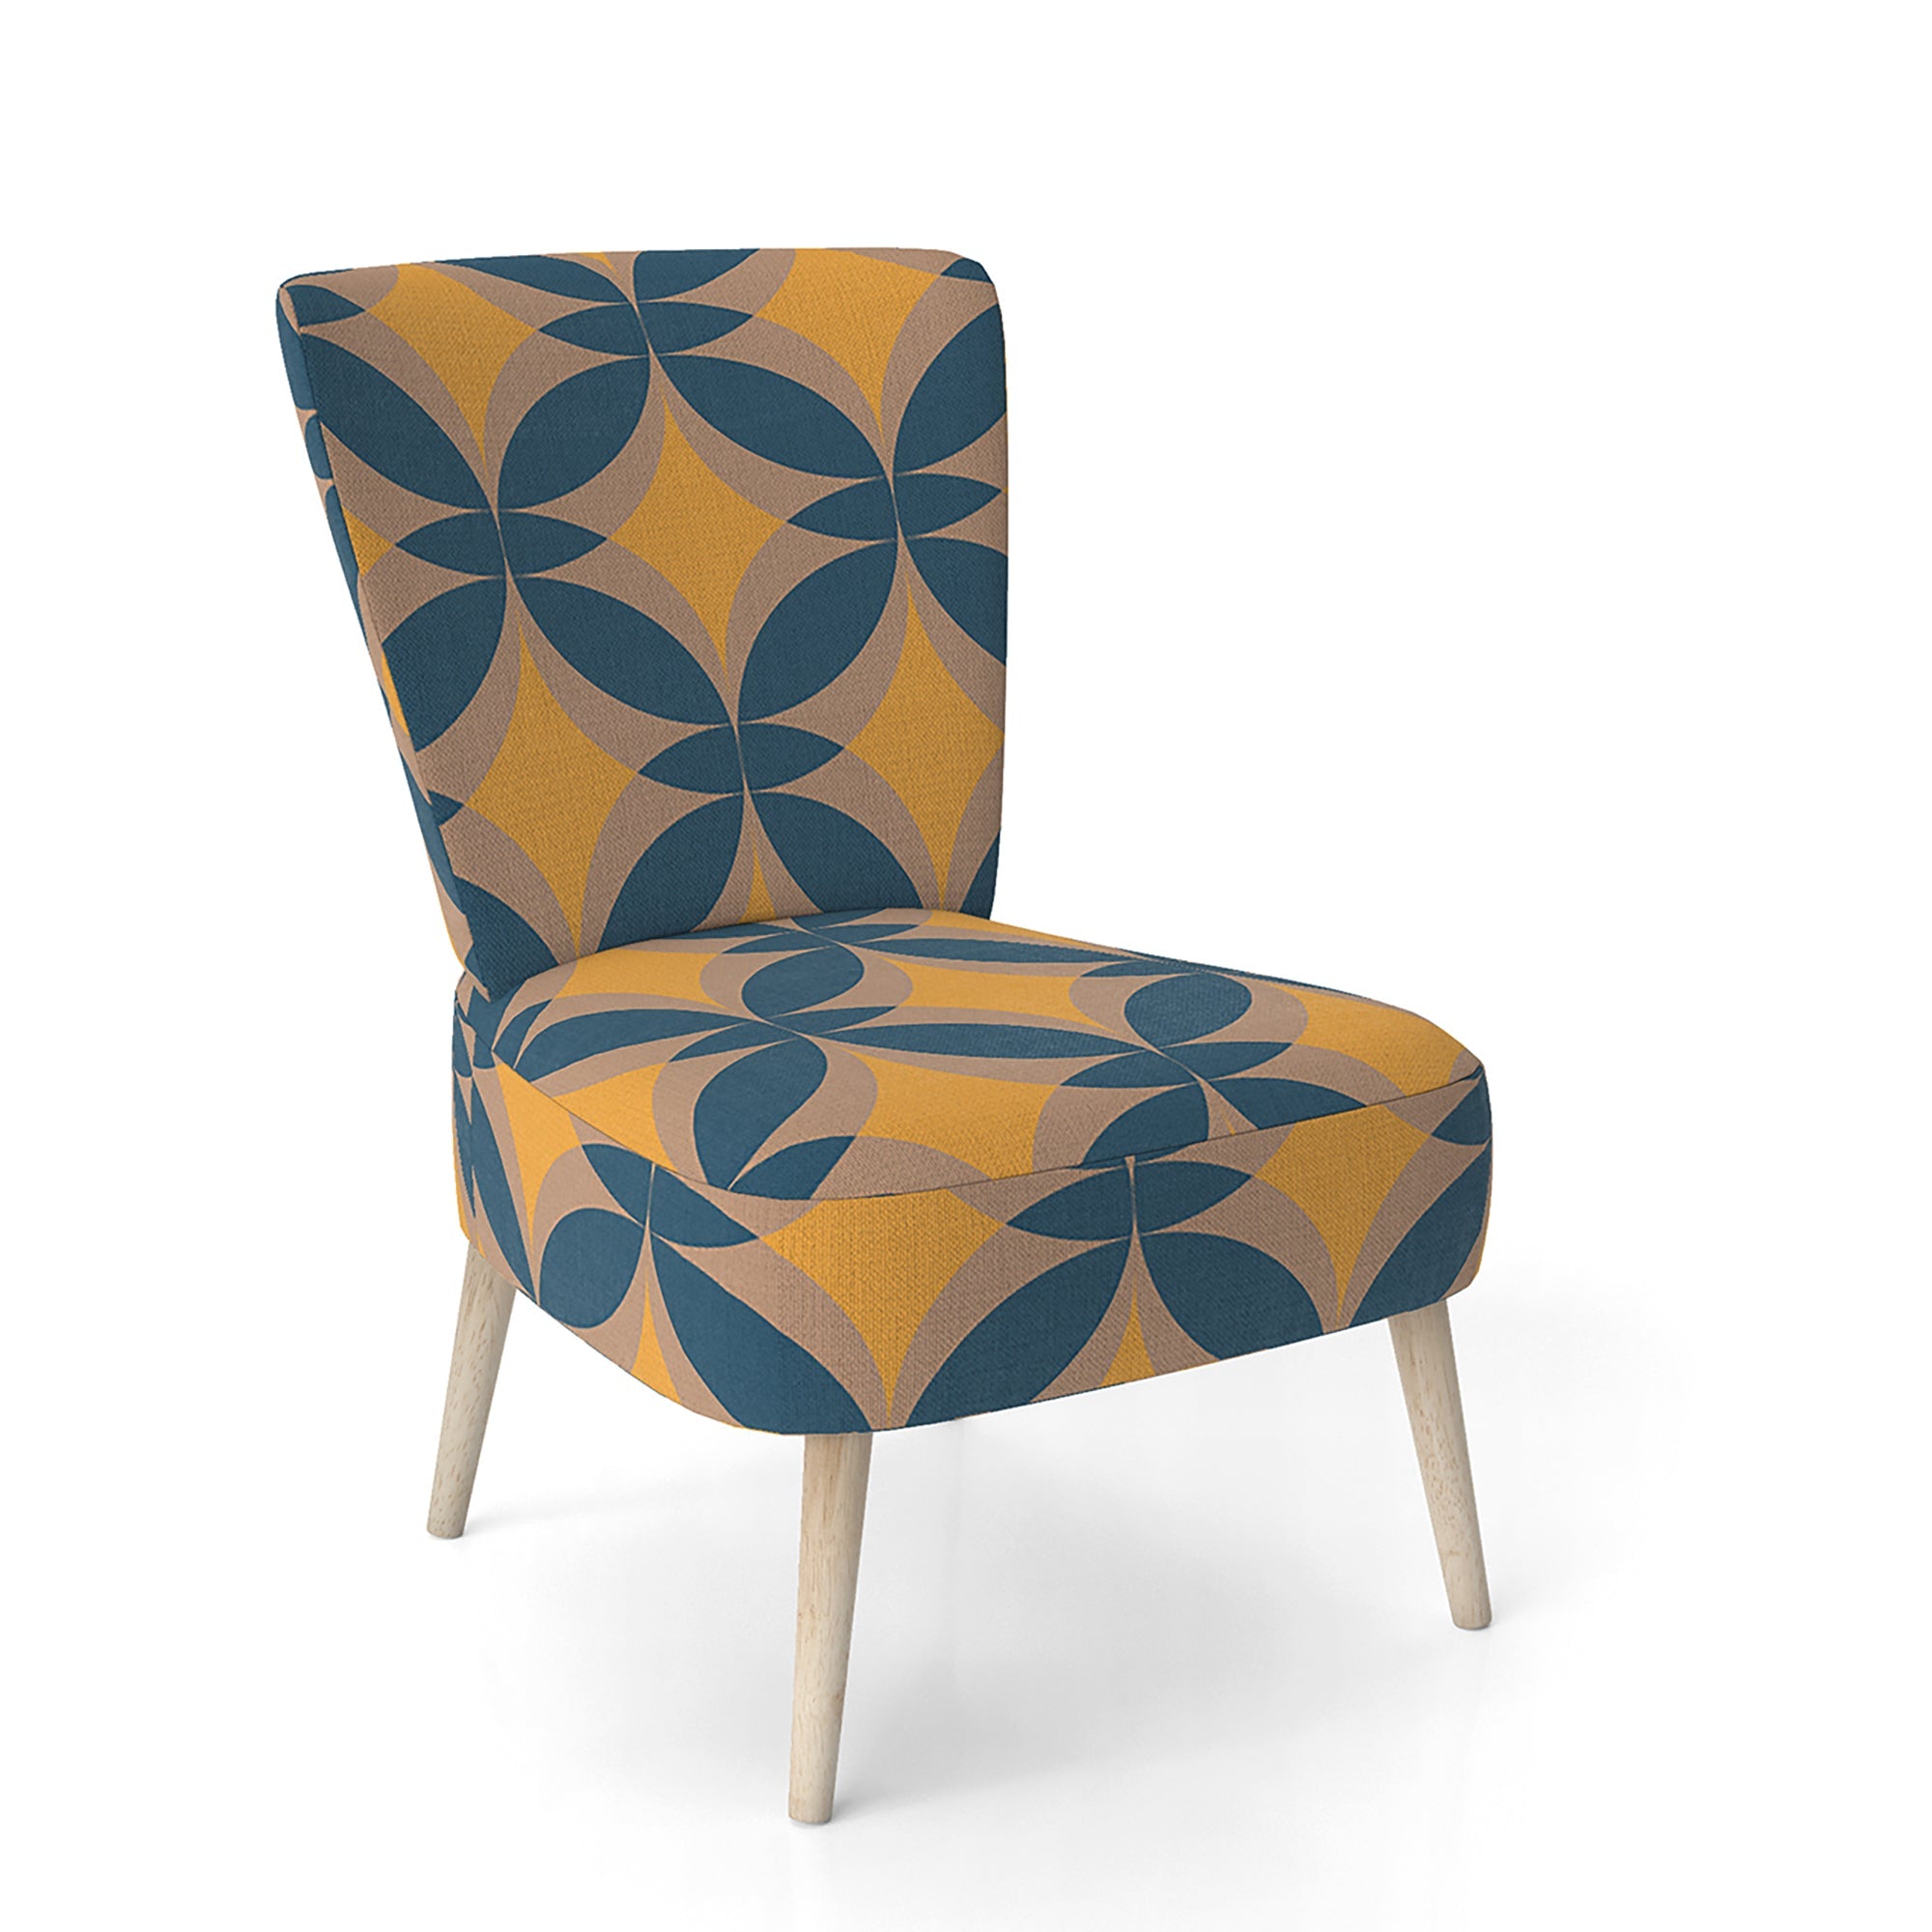 Abstract Retro Design III - Upholstered Mid-Century Accent Chair